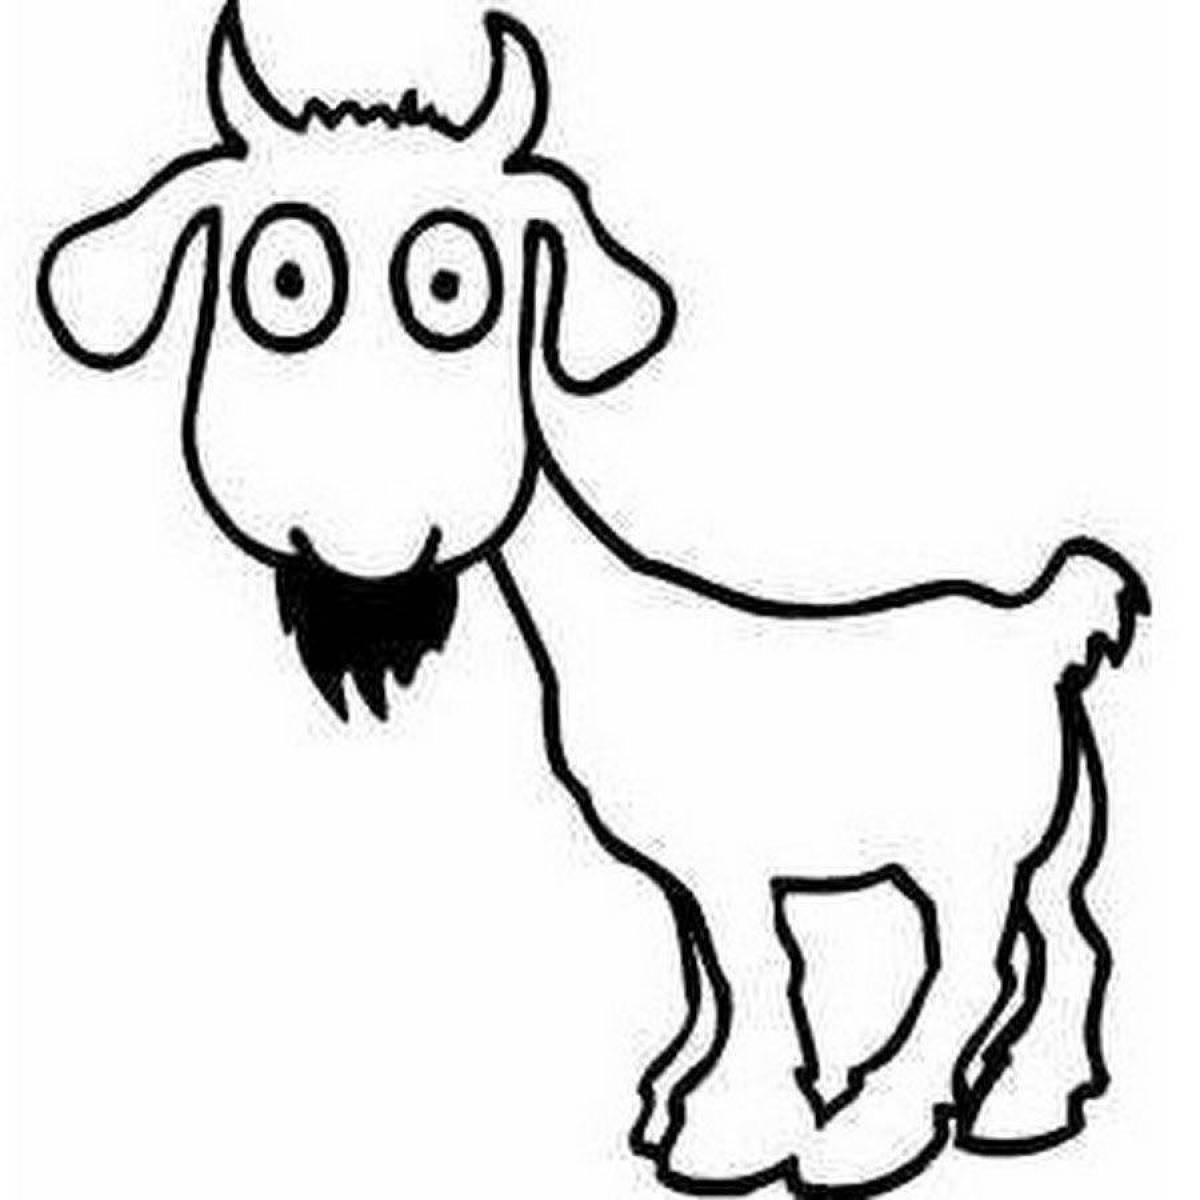 Funny goat coloring pages for kids